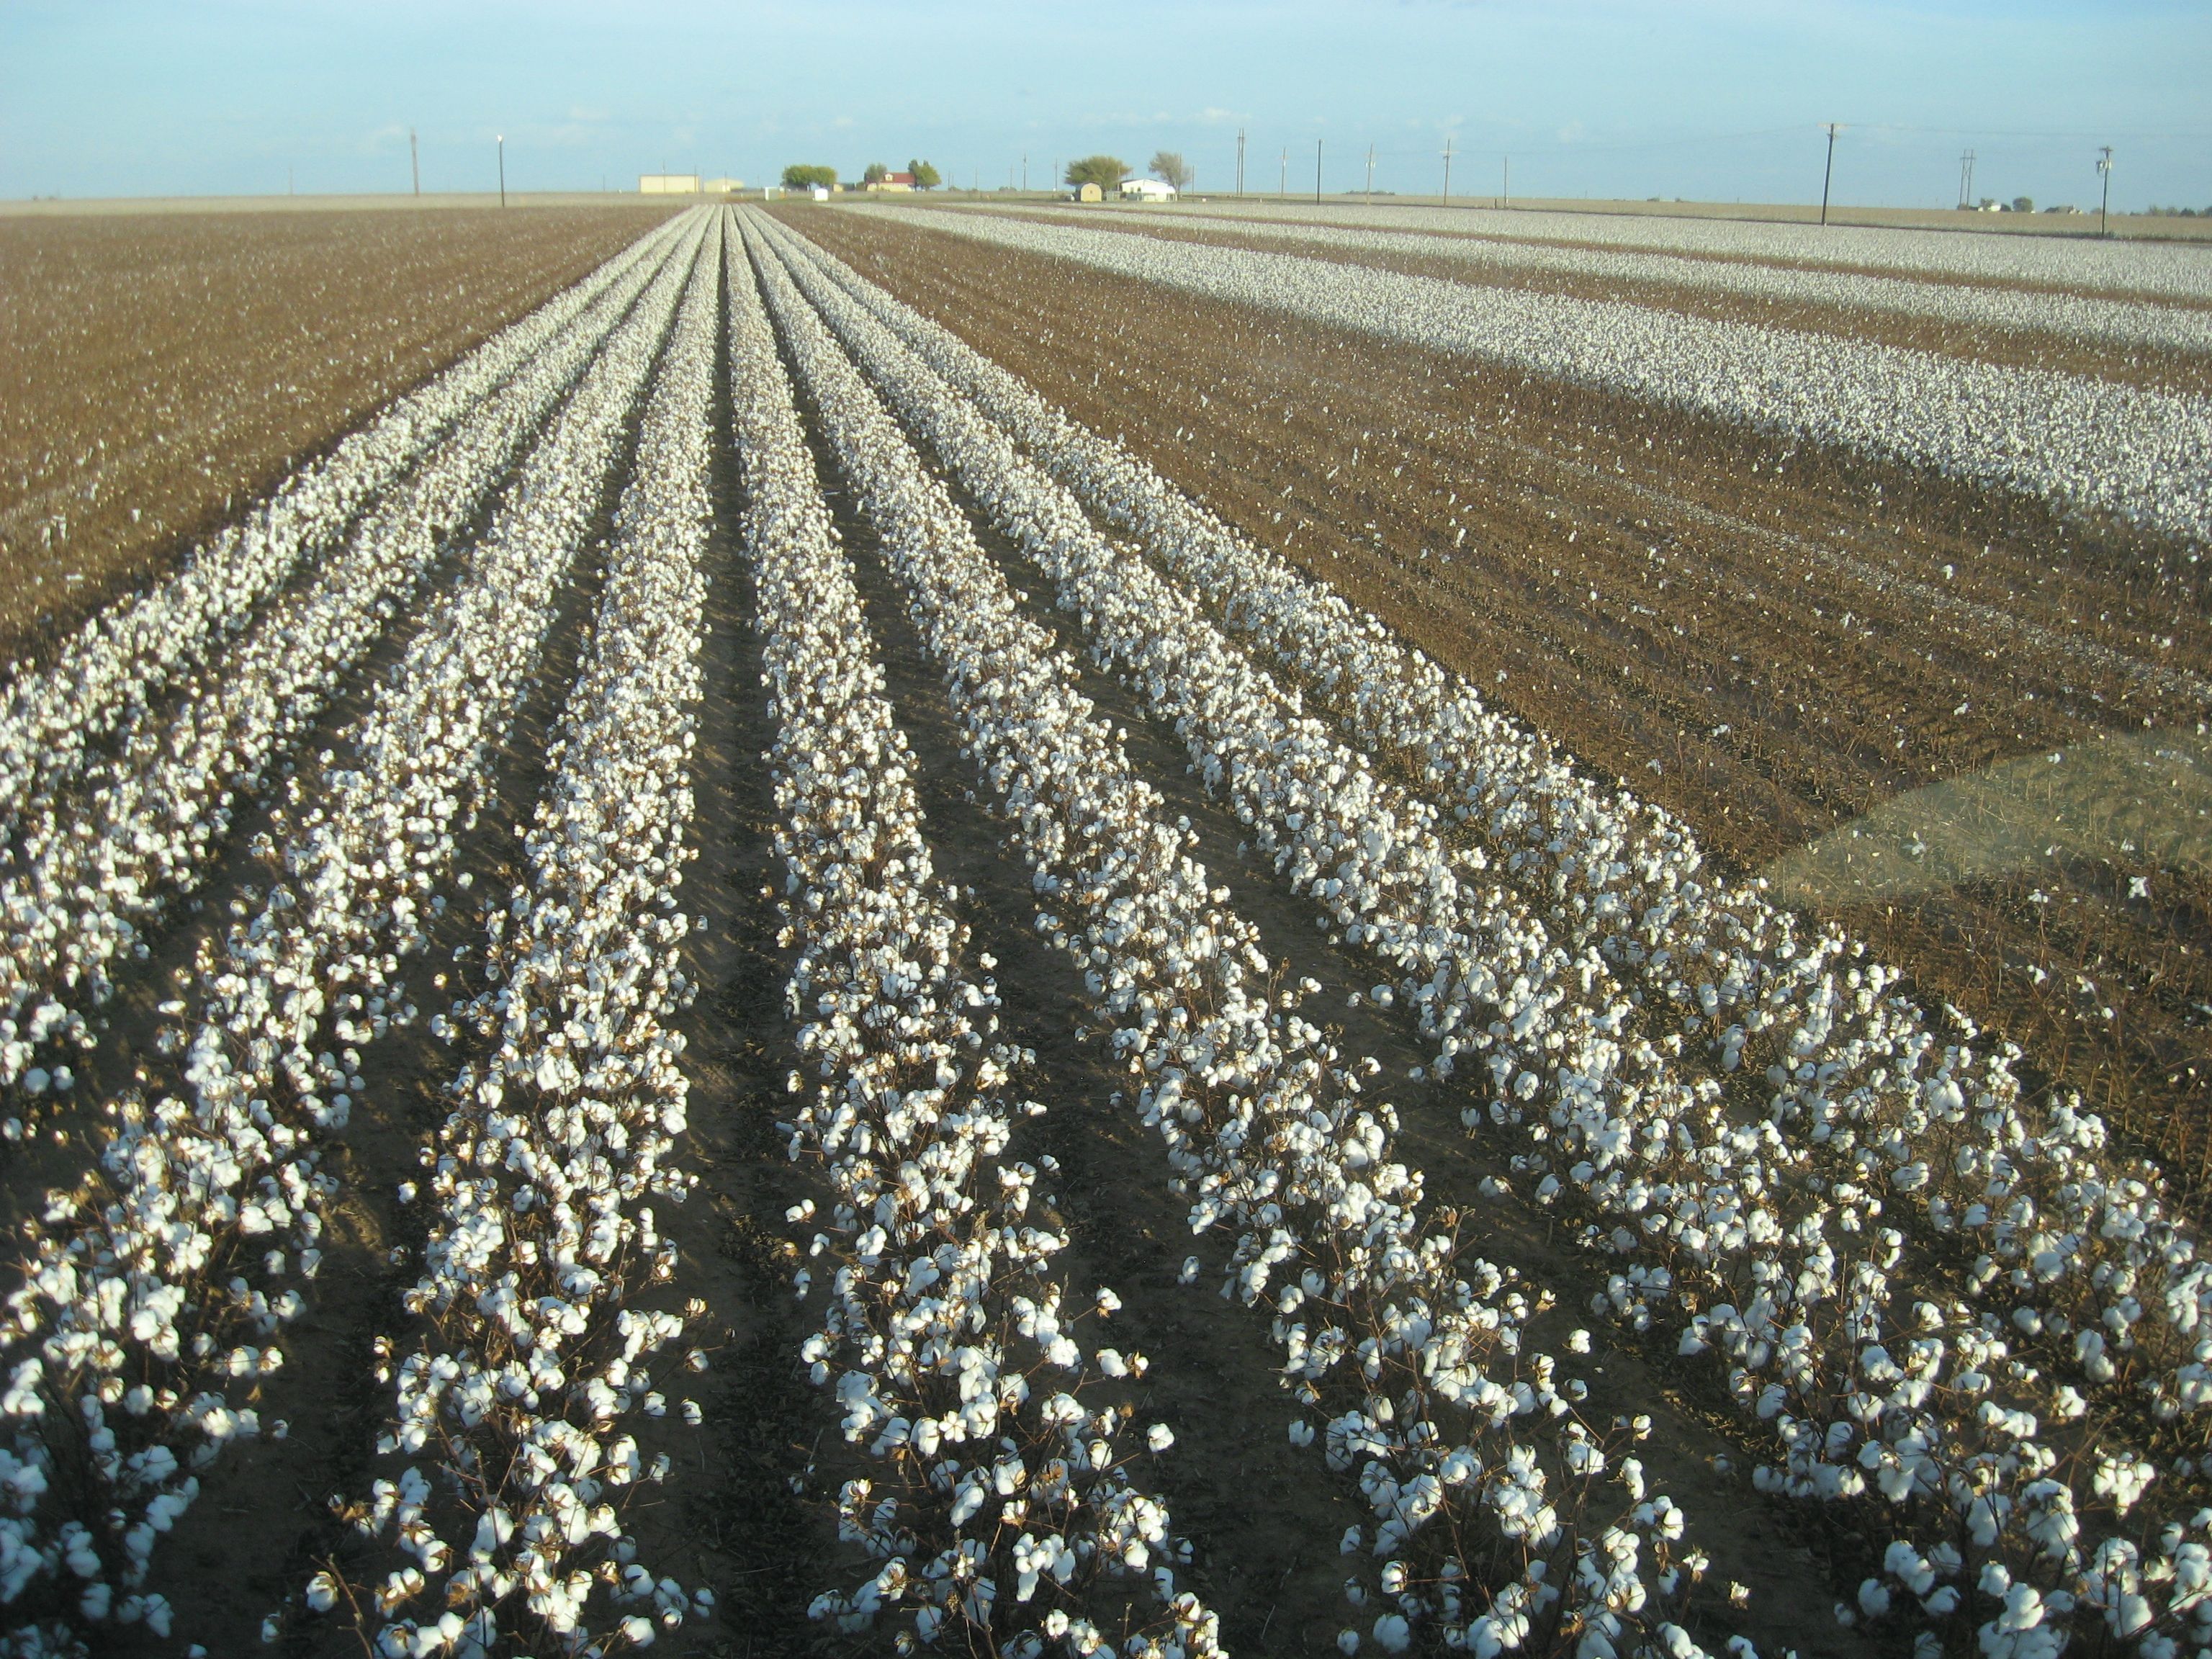 Cotton Field Wallpaper and Picture download free